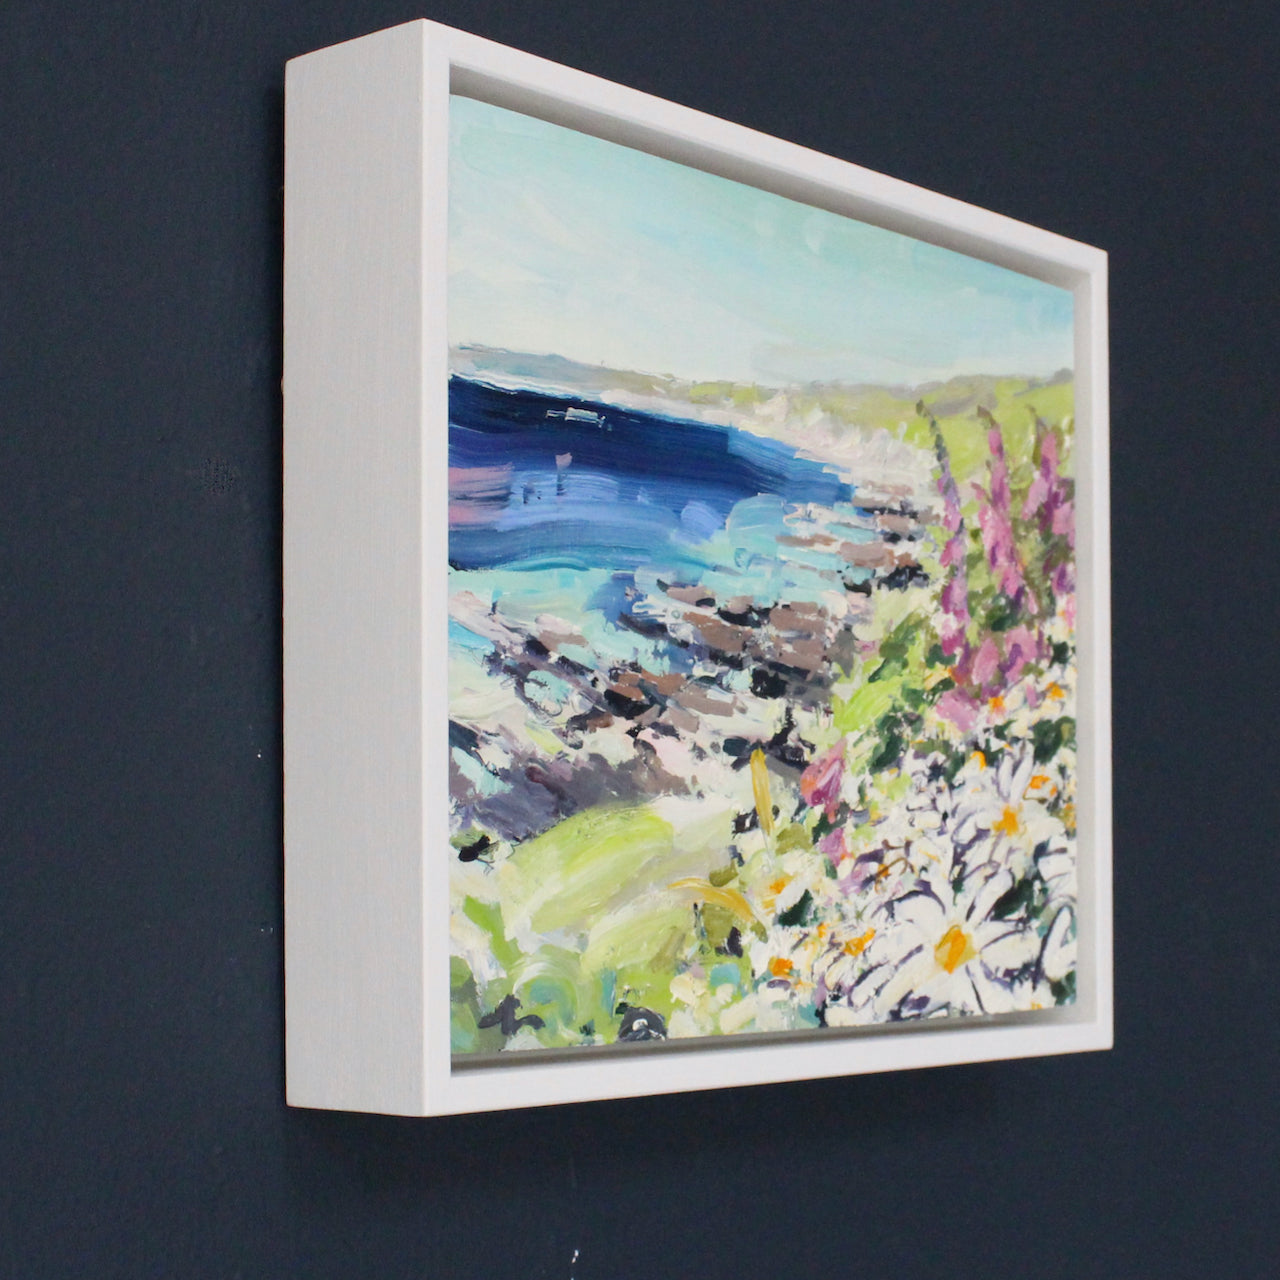 Painting of White and purple flowers in the foreground on headland with blue sea and grey rock formations by artist Jill Hudson